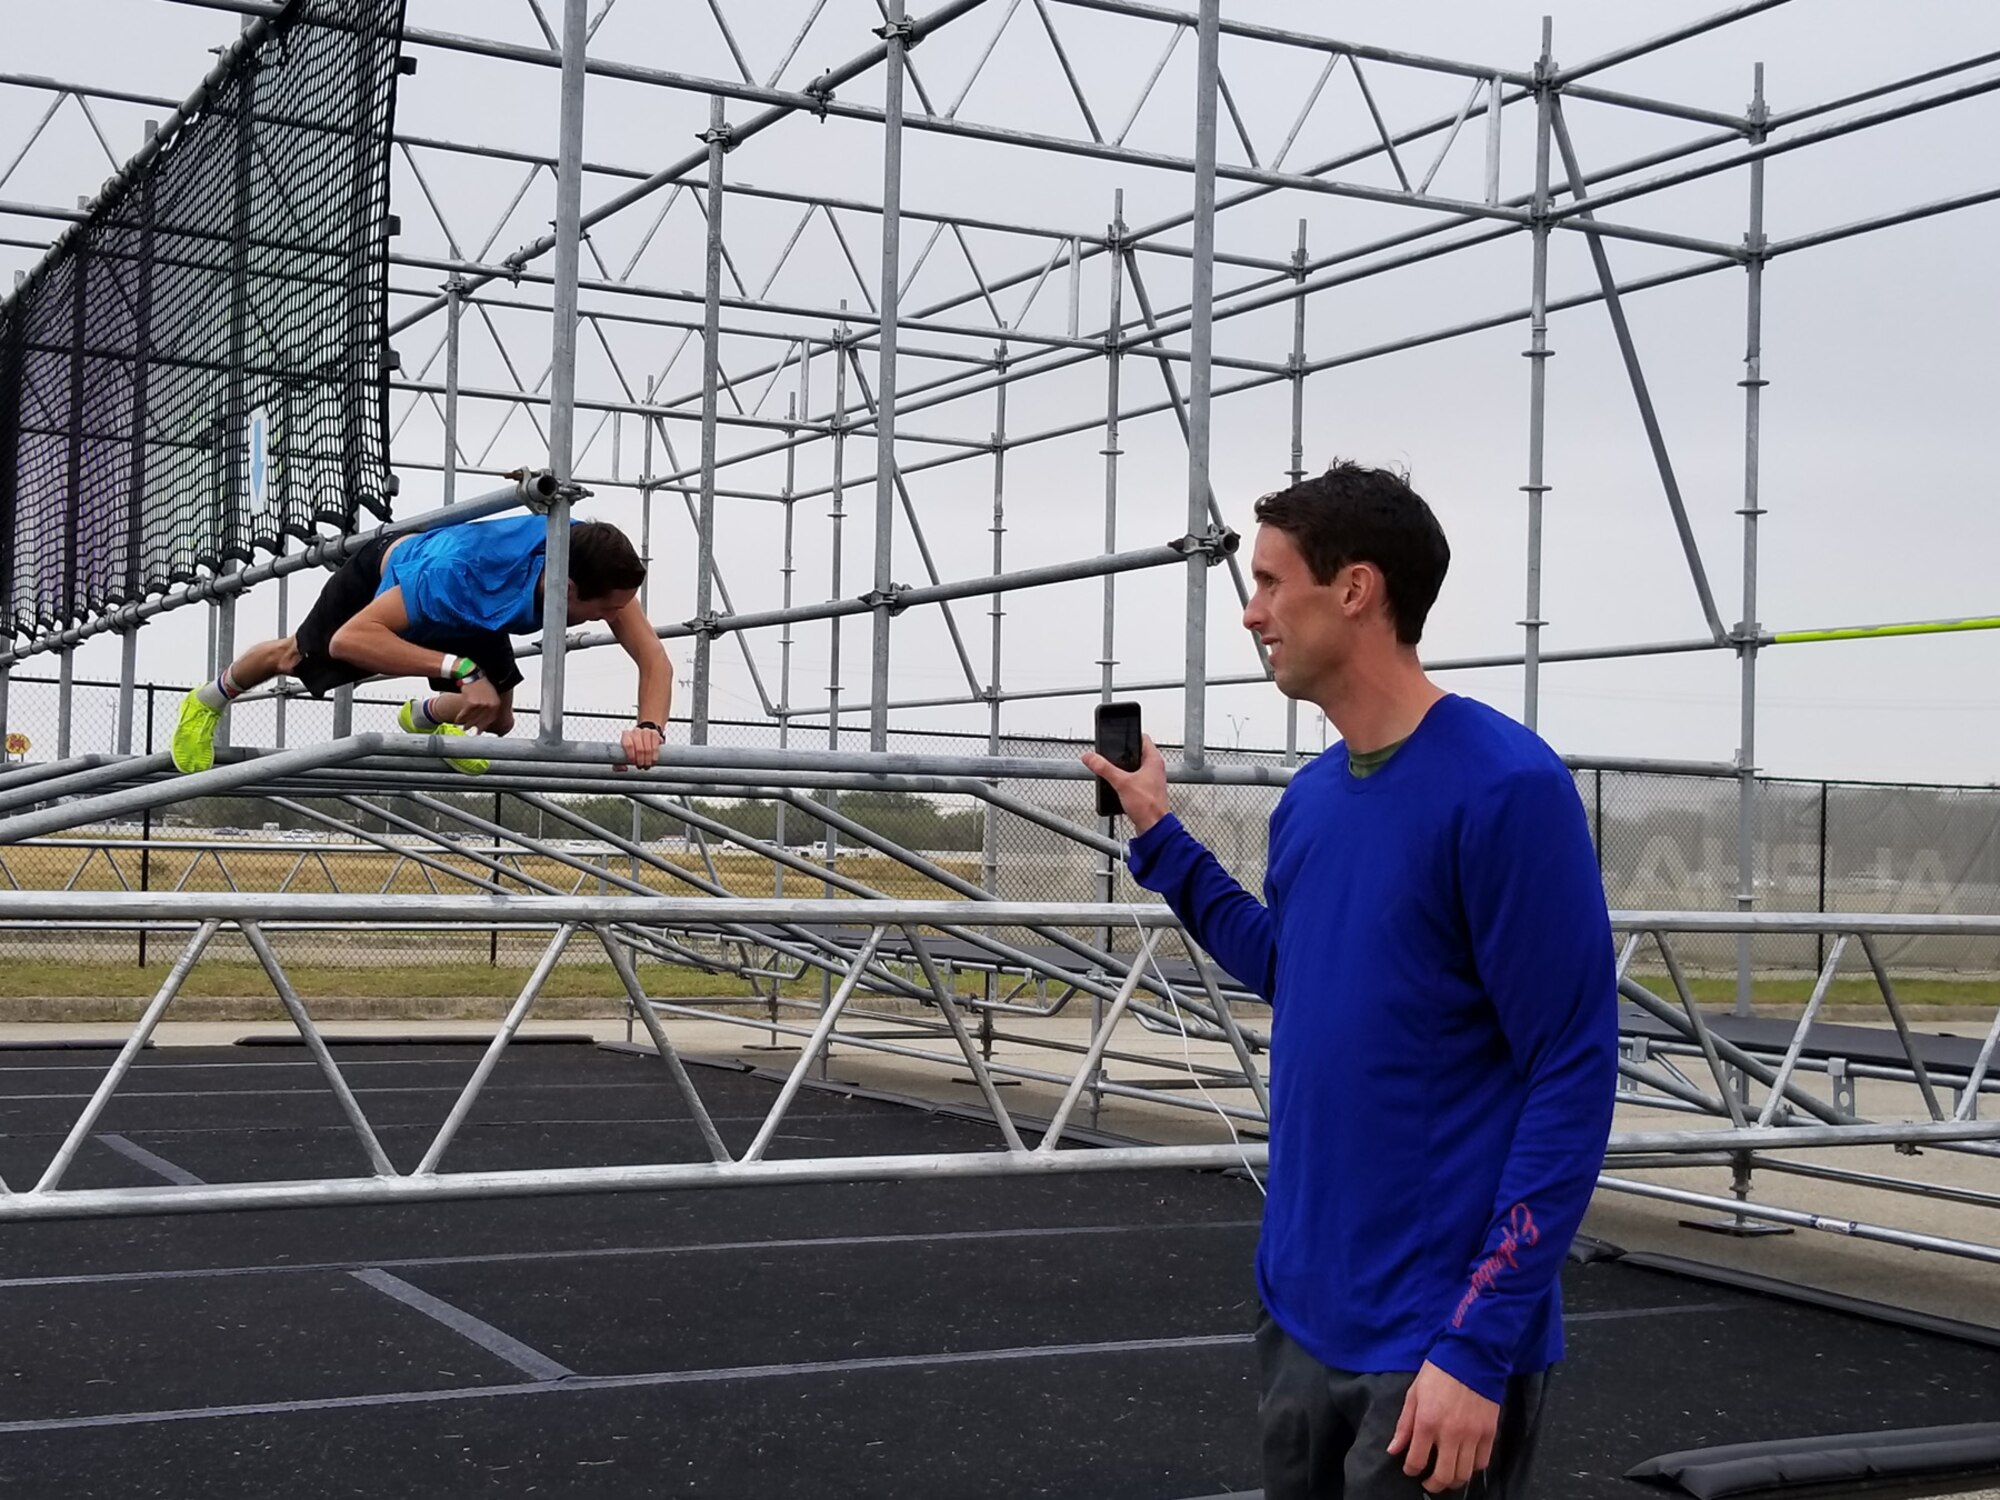 .S. Air Force Capt. Rob Simmons tackles the Gut Buster obstacle on the Alpha Warrior Battle Rig at Retama Park in Selma, Texas, as his identical twin brother, Capt. Cale Simmons, shoots video. Cale placed second in the men's division in the Air Force Alpha Warrior Final Battle on Nov. 11, 2017. (U.S. Air Force photo by Carole Chiles Fuller)